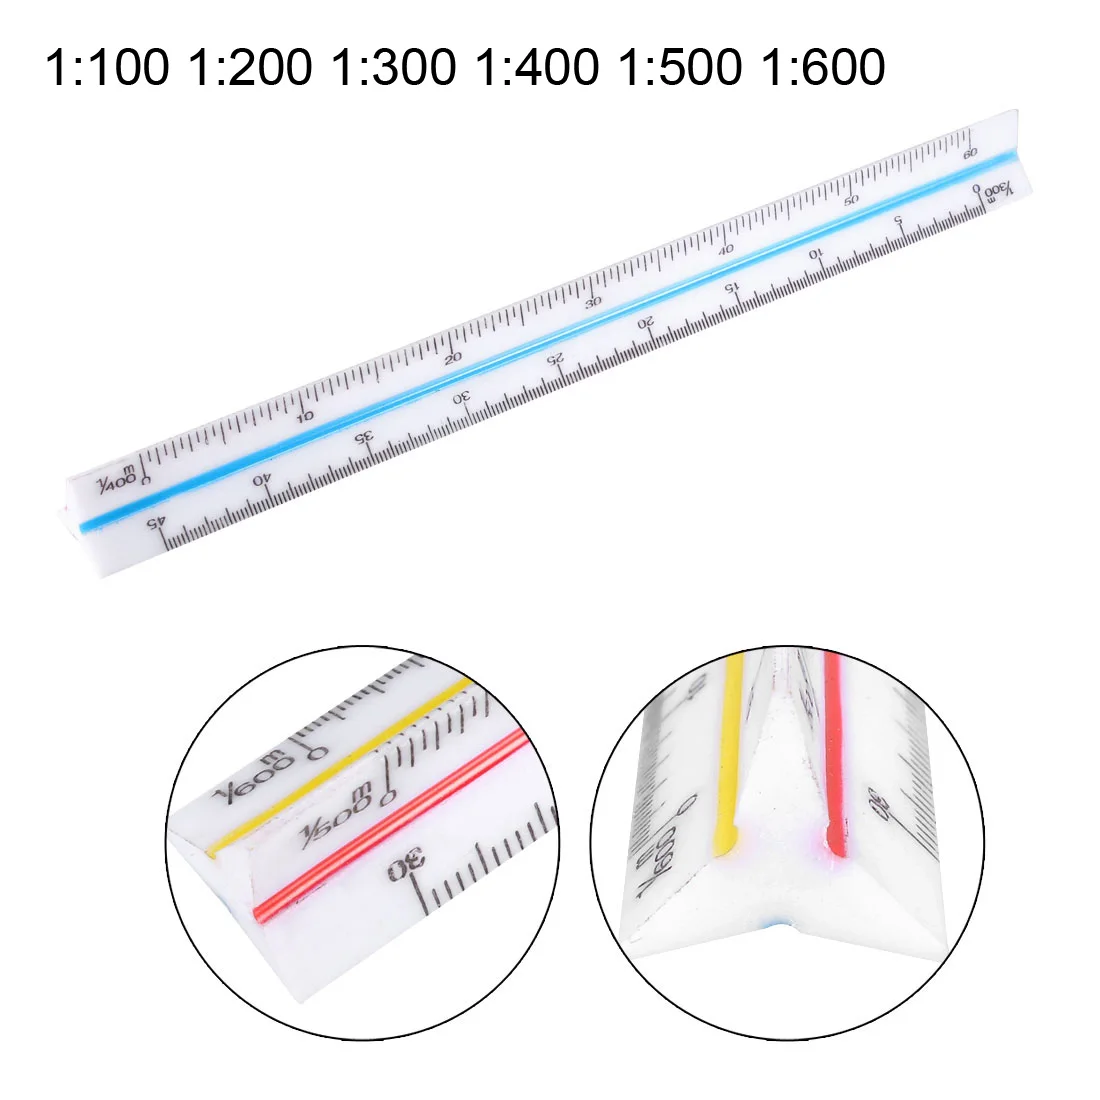 Triangular Scale Ruler 15cm Plastic Drafting Triangle Scale Architect Engineer Technical Ruler Stationery 1:100 - 1:600 30cm golden scale ruler engineers drafting triangular architect scale aluminum grooves